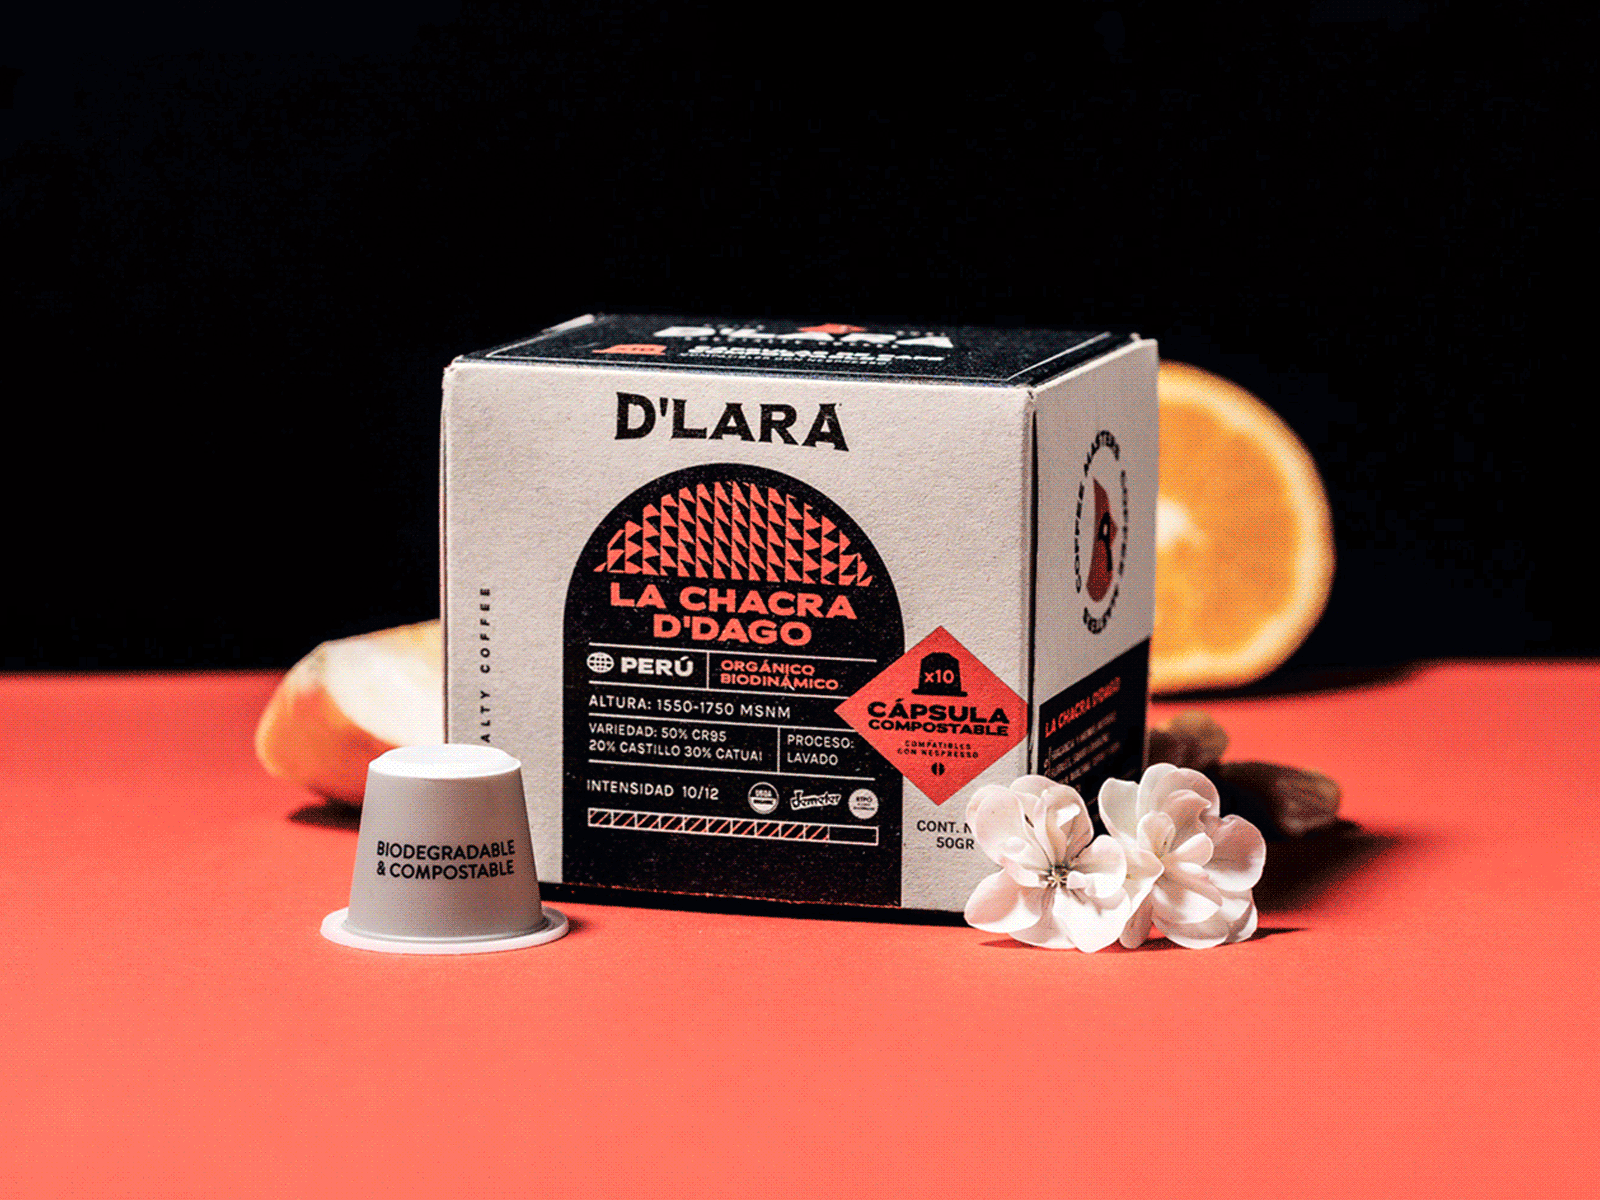 D'Lara Specialty Coffee - Coffee pods Packaging capsulas compostables chile brand coffee coffee bean coffee pods design empaque logodesign nespresso origin coffee packaging specialty coffee